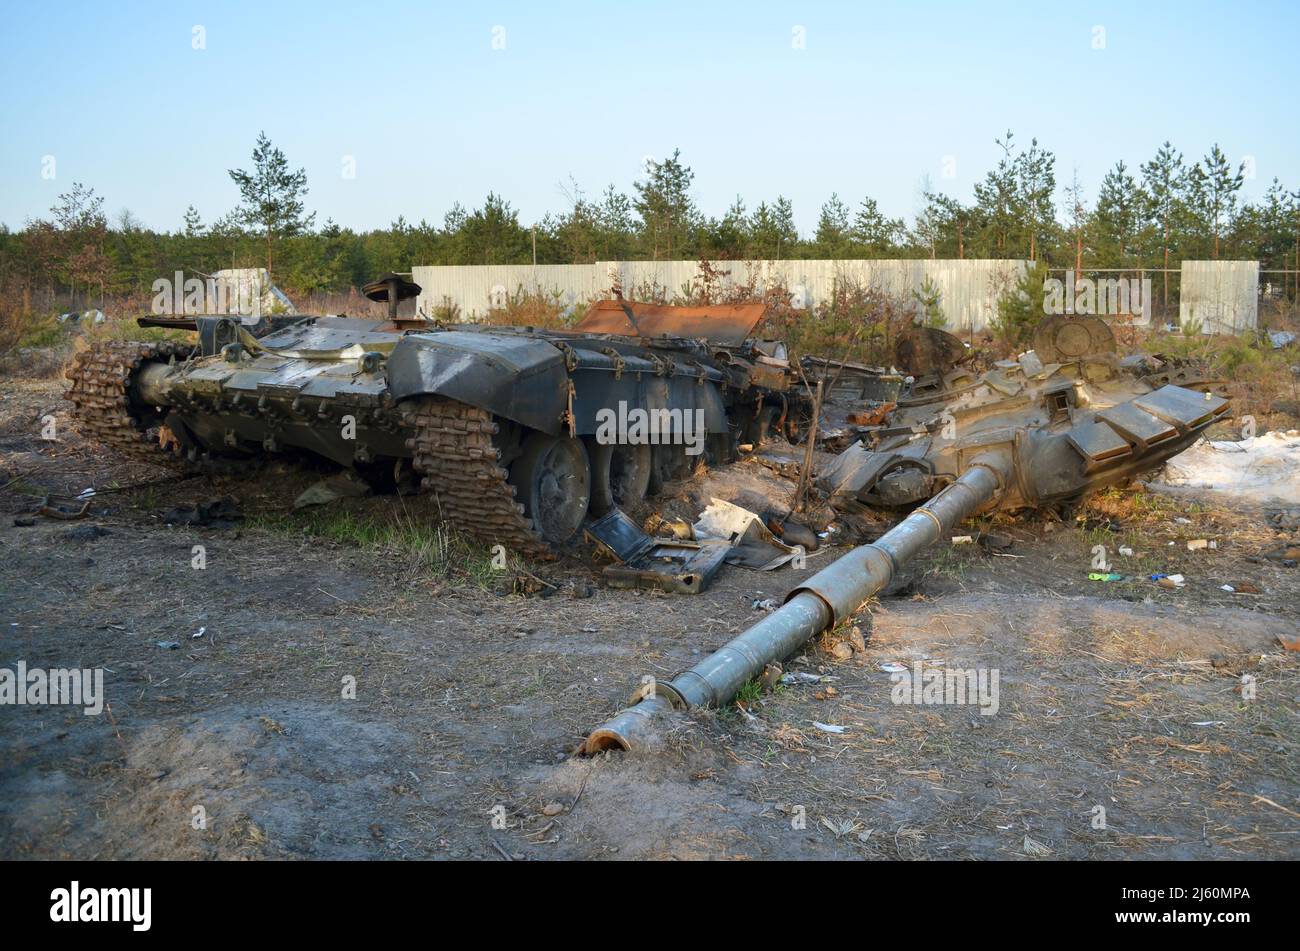 Dmytrivka village, Kyiv region, Ukraine - Apr 14, 2022: Destroyed Russian tank with a white painting V following the Ukrainian forces counter-attacks. Stock Photo